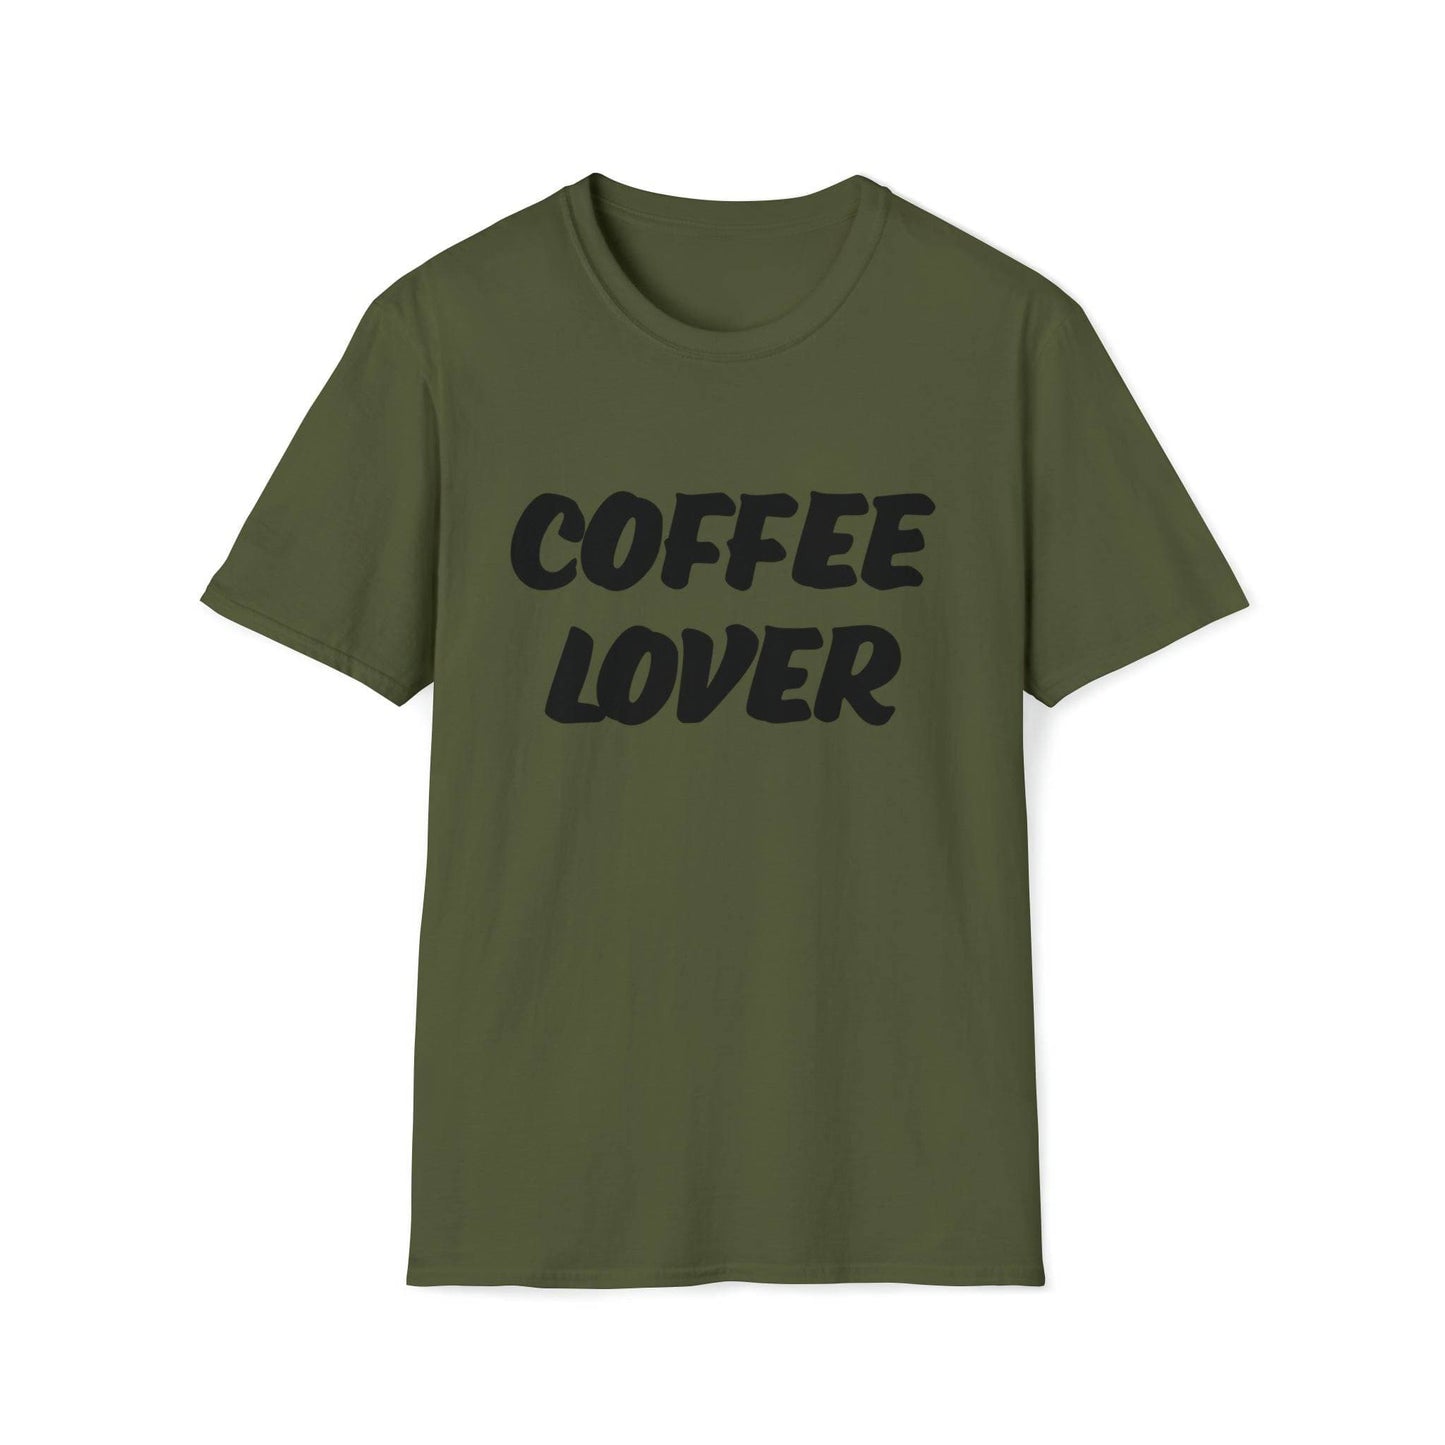 On Pointe Coffee Unisex Softstyle T-Shirt - On Pointe Coffee